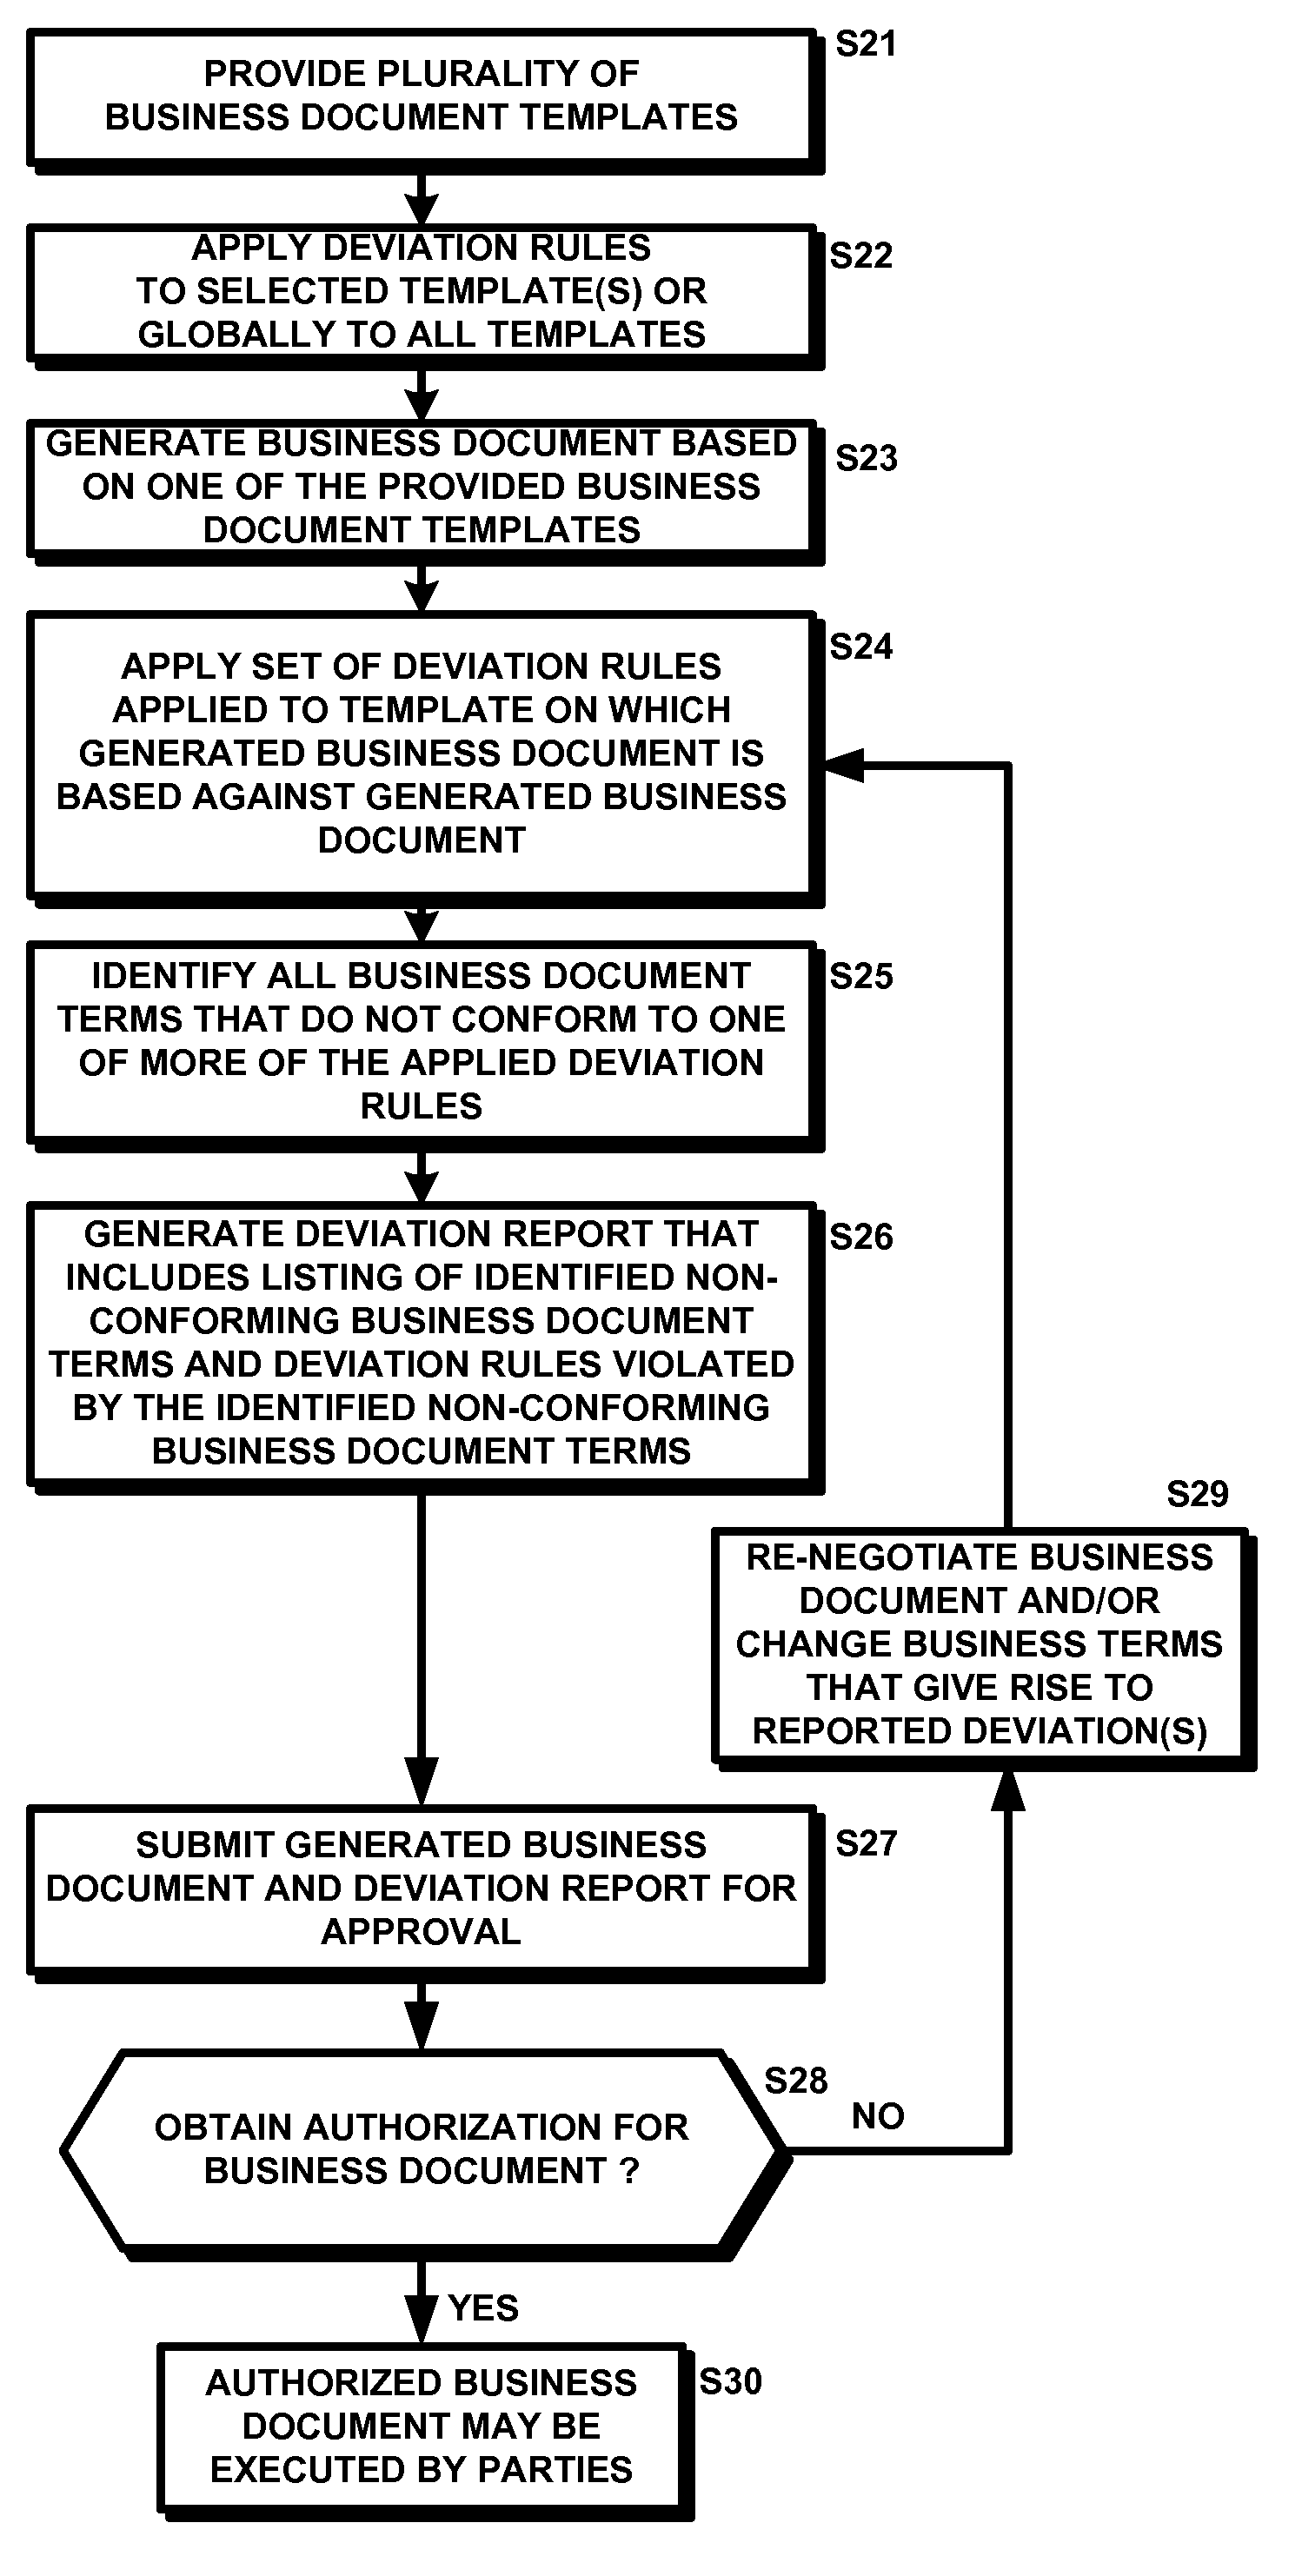 Computer-implemented methods and systems for identifying and reporting deviations from standards and policies for contracts, agreements and other business documents